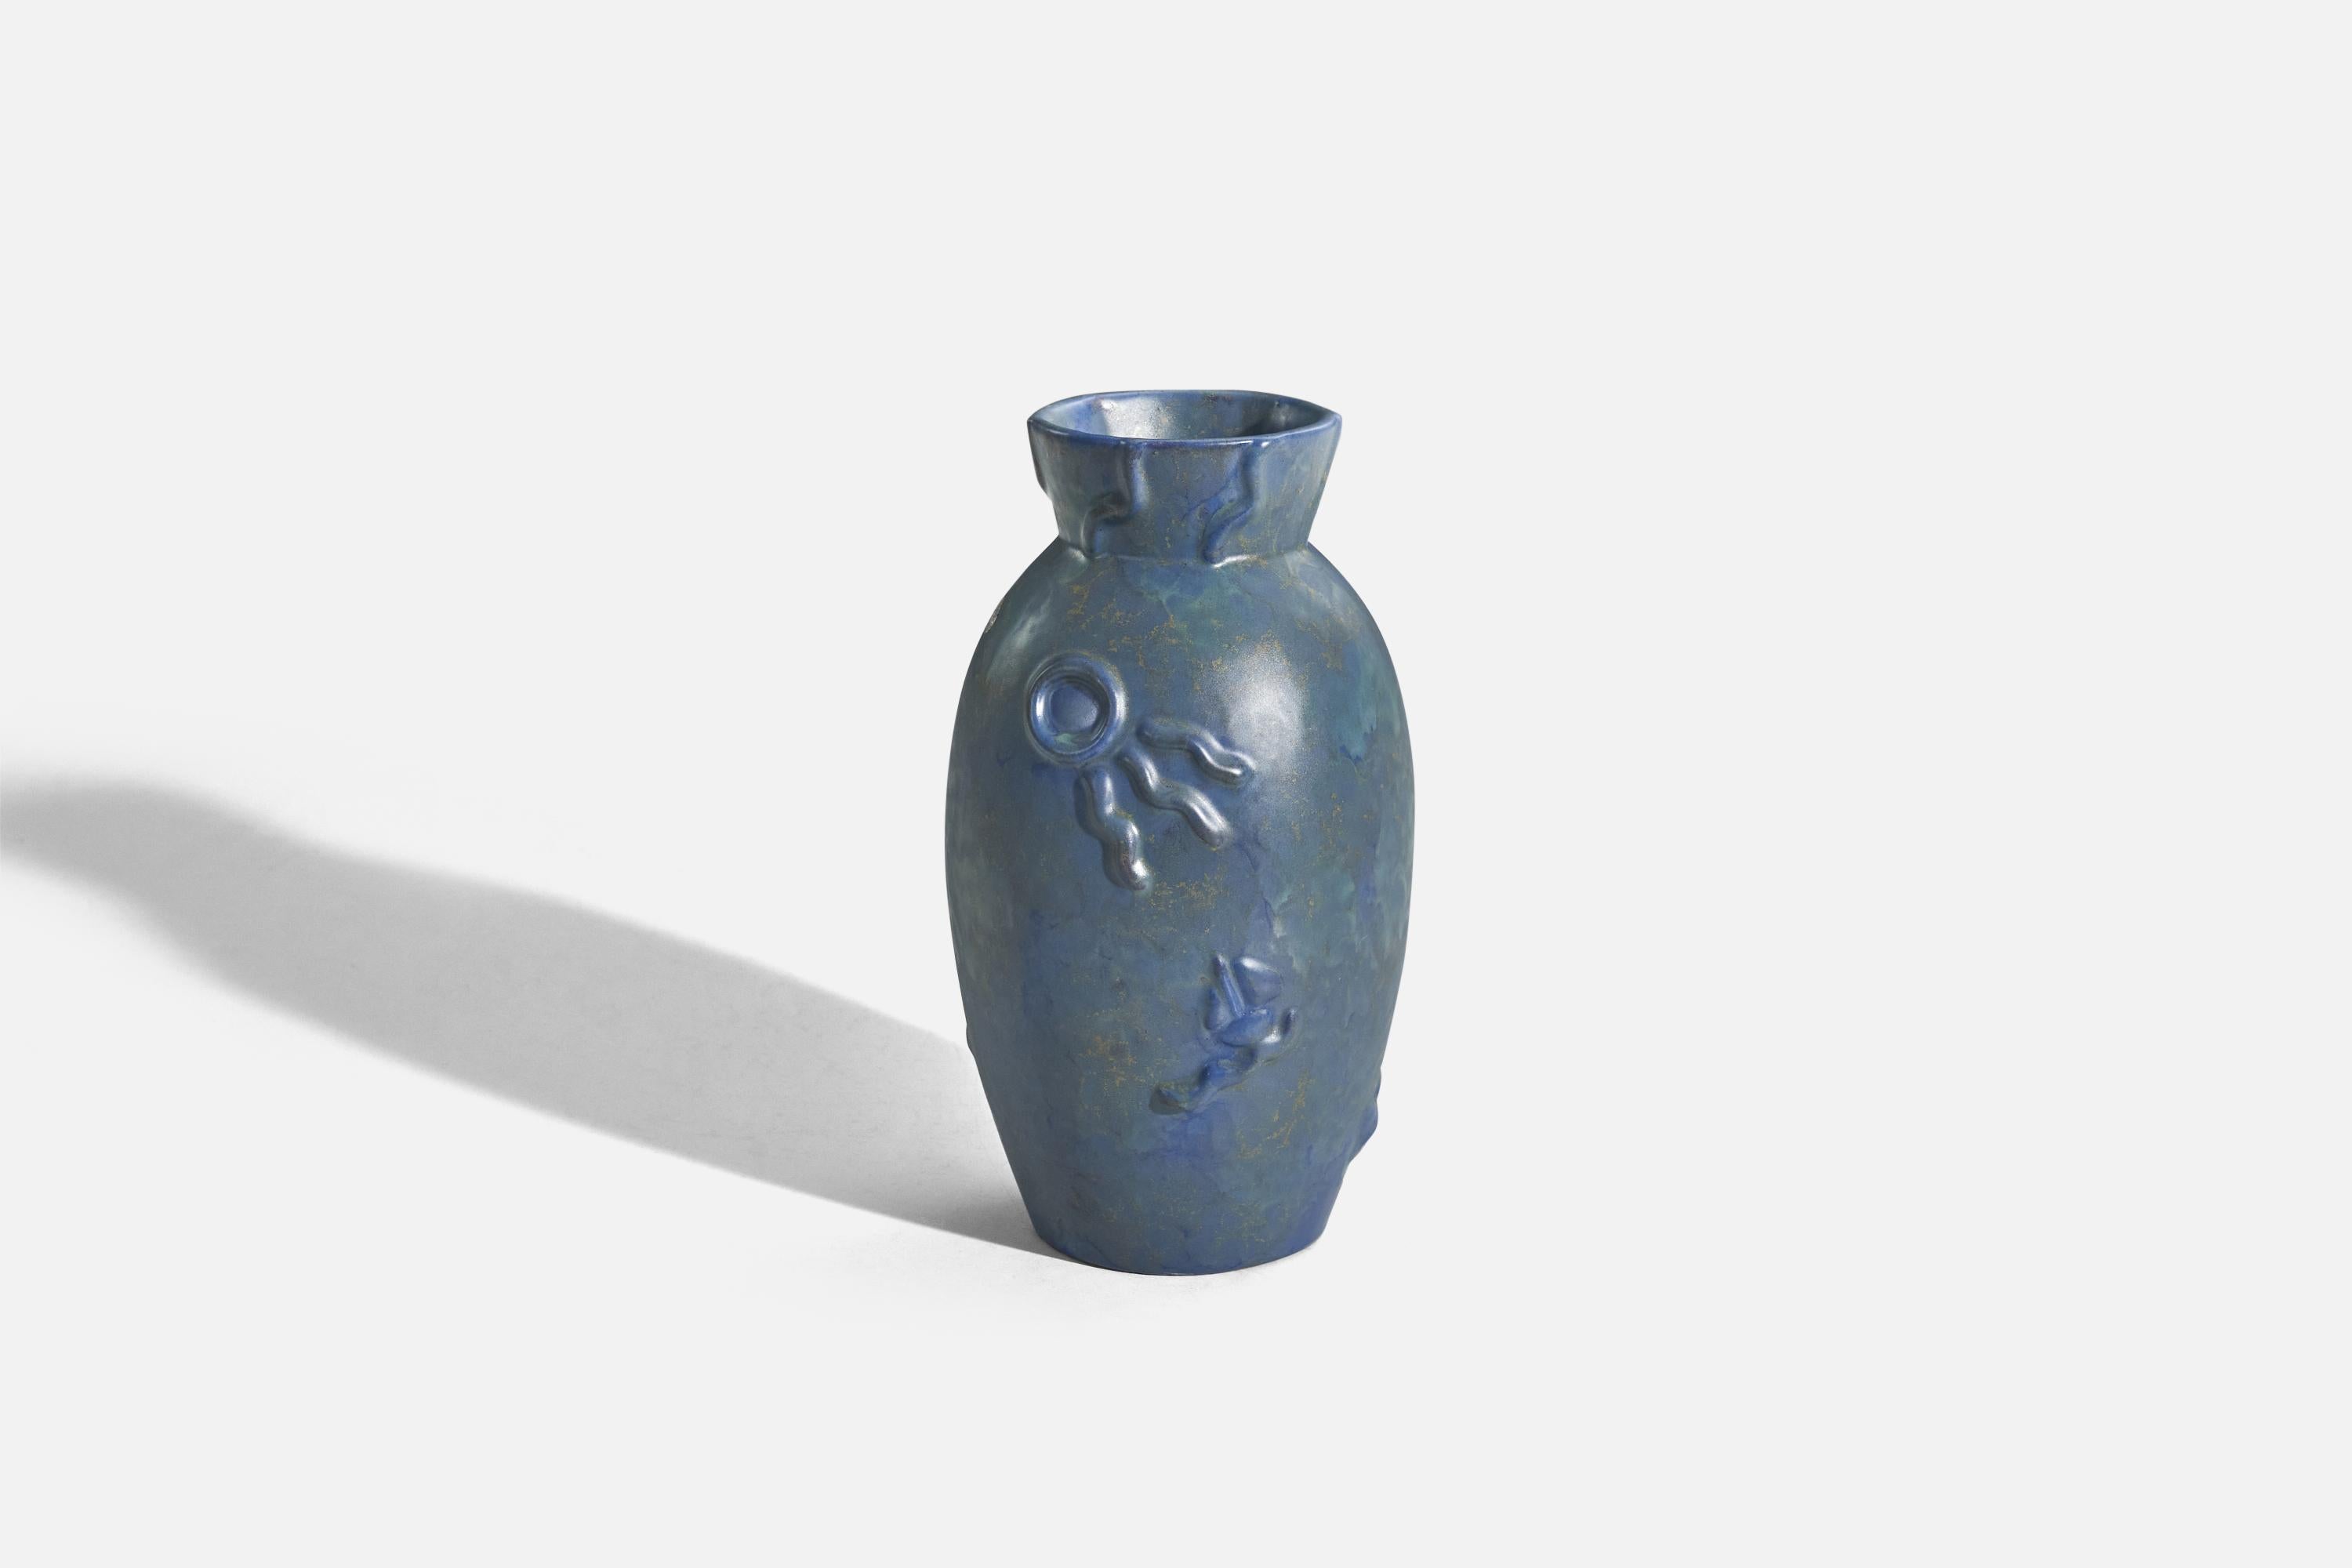 A blue vase designed by Anna-Lisa Thomson and produced by Upsala-Ekeby, Sweden, c. 1940s. 

